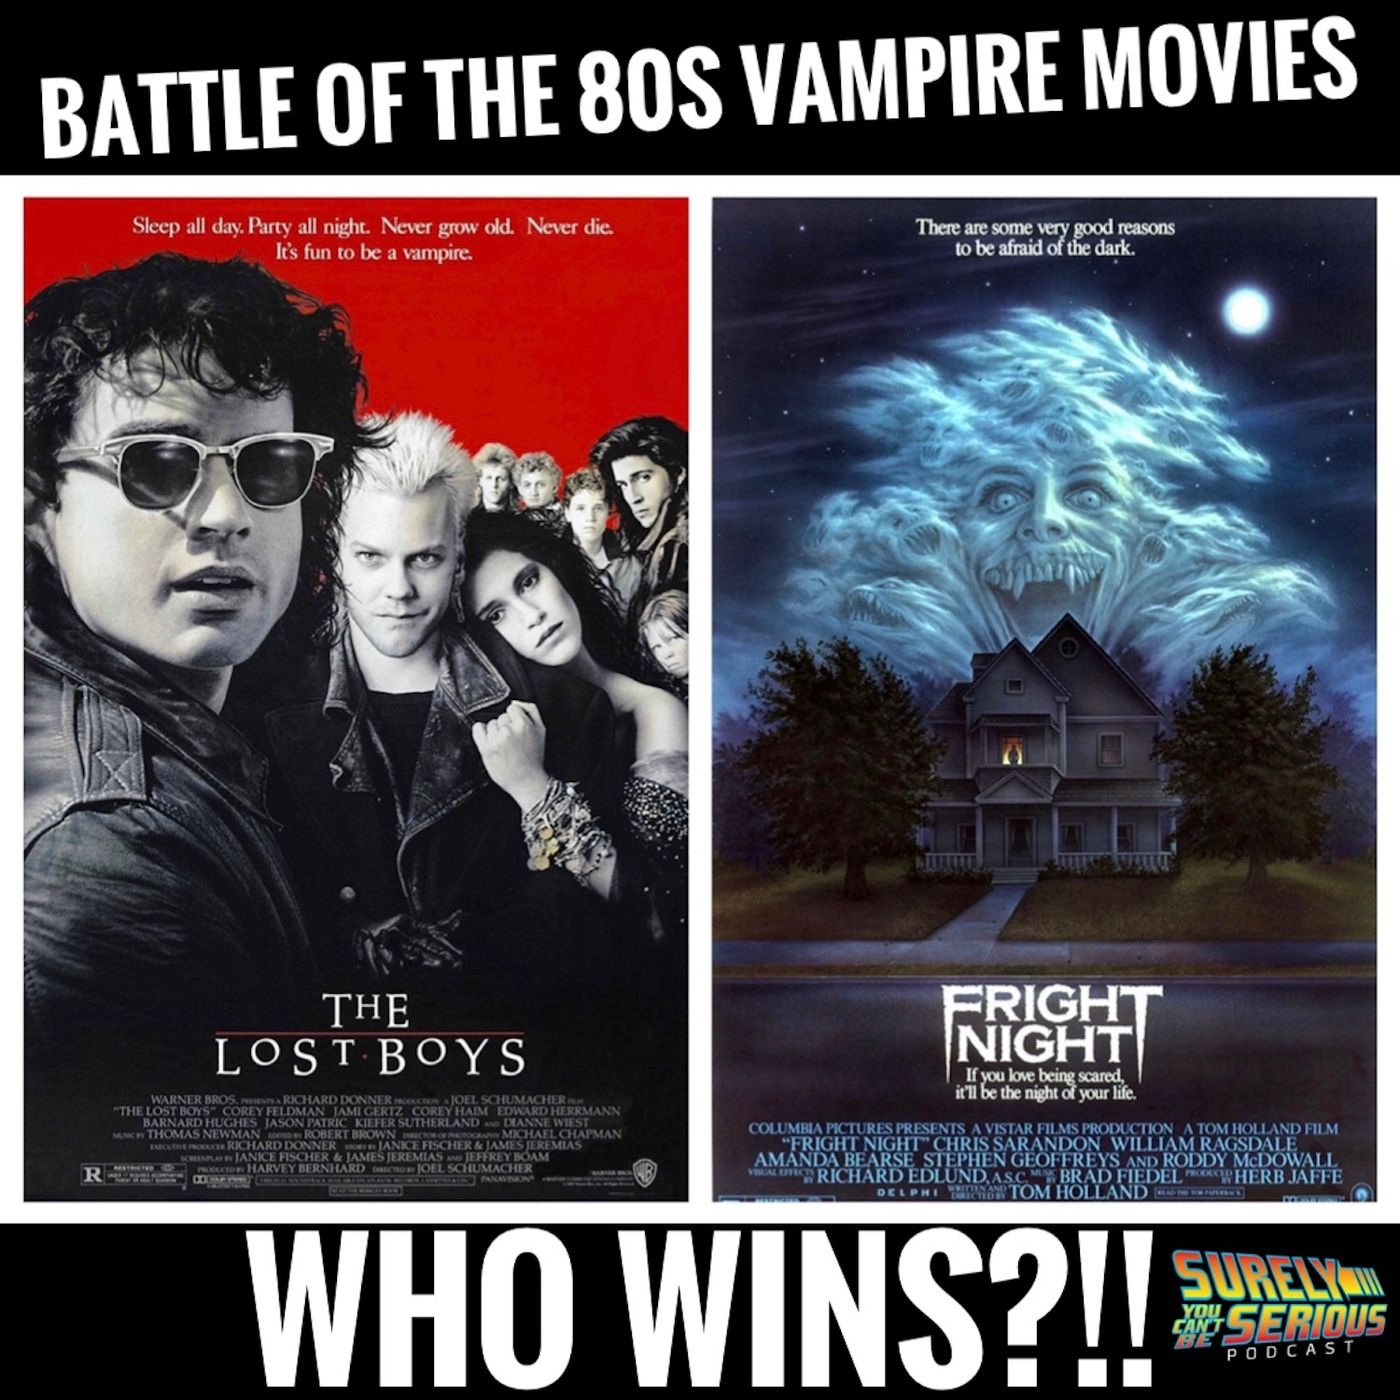 The Lost Boys ('87) vs. Fright Night ('85): Battle of the 80s Vampire Movies Part 1 Image